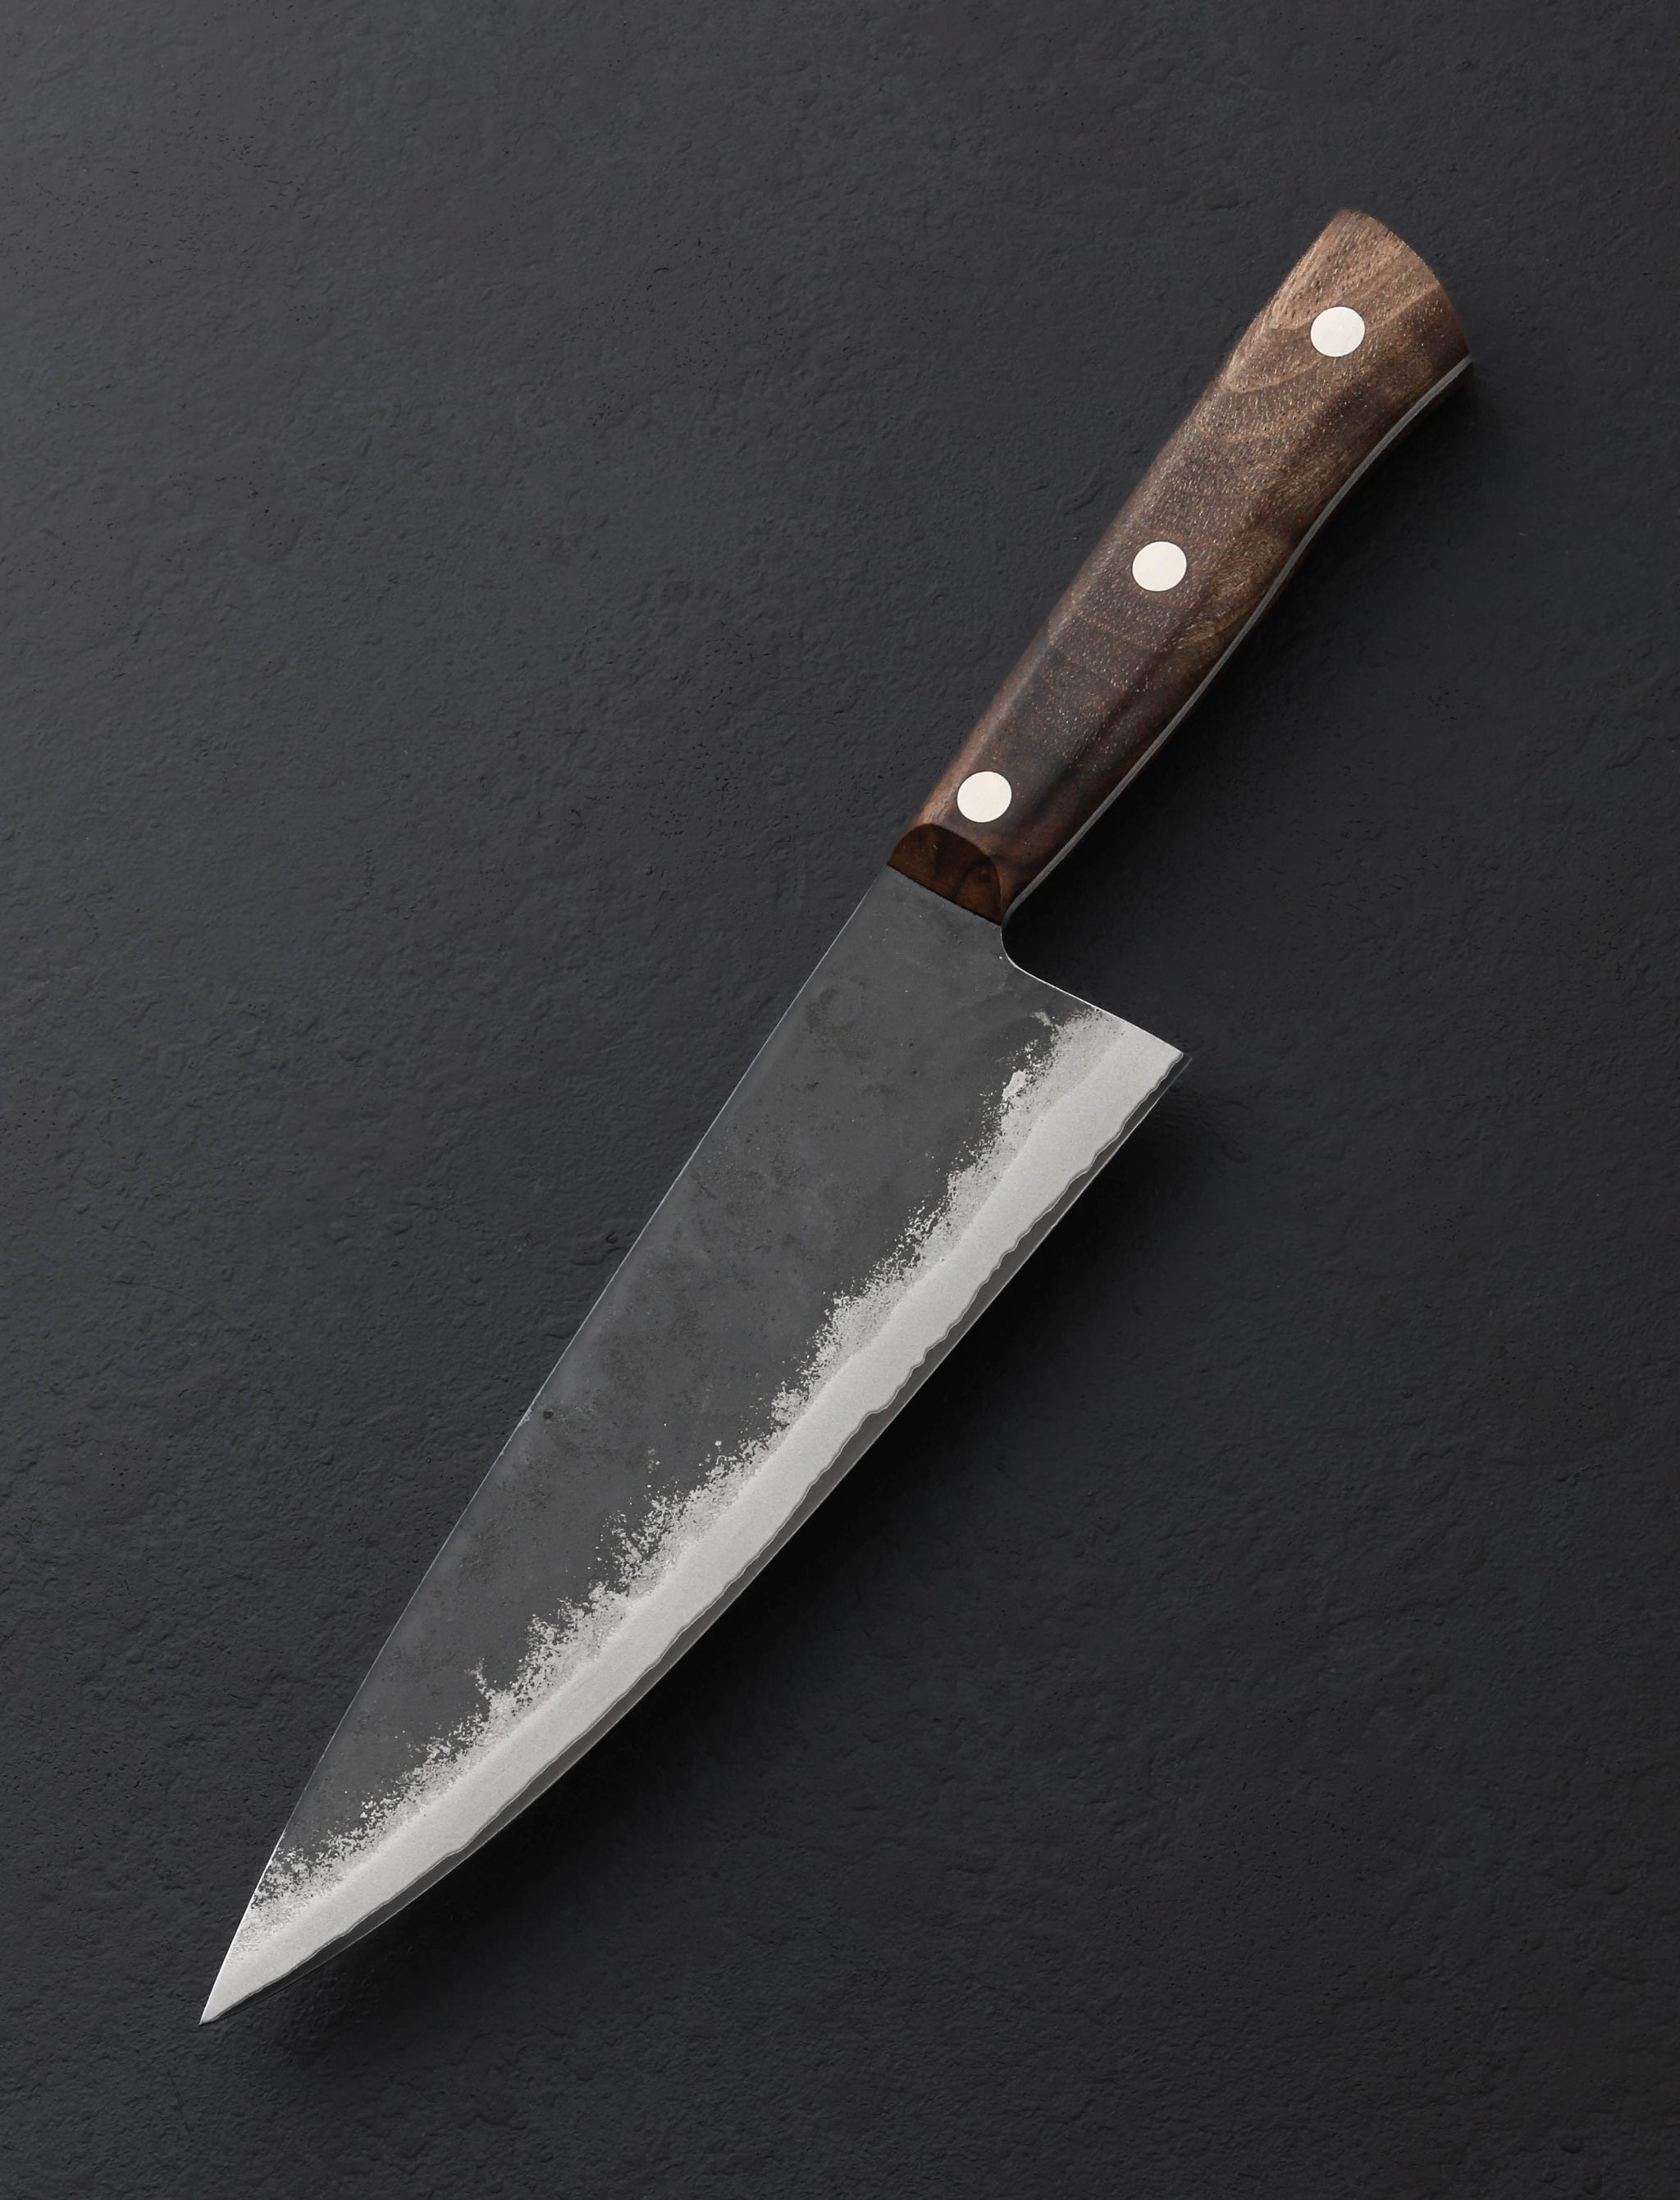 Blenheim Forge a cut above after near-£30,000 knife sale to Gordon